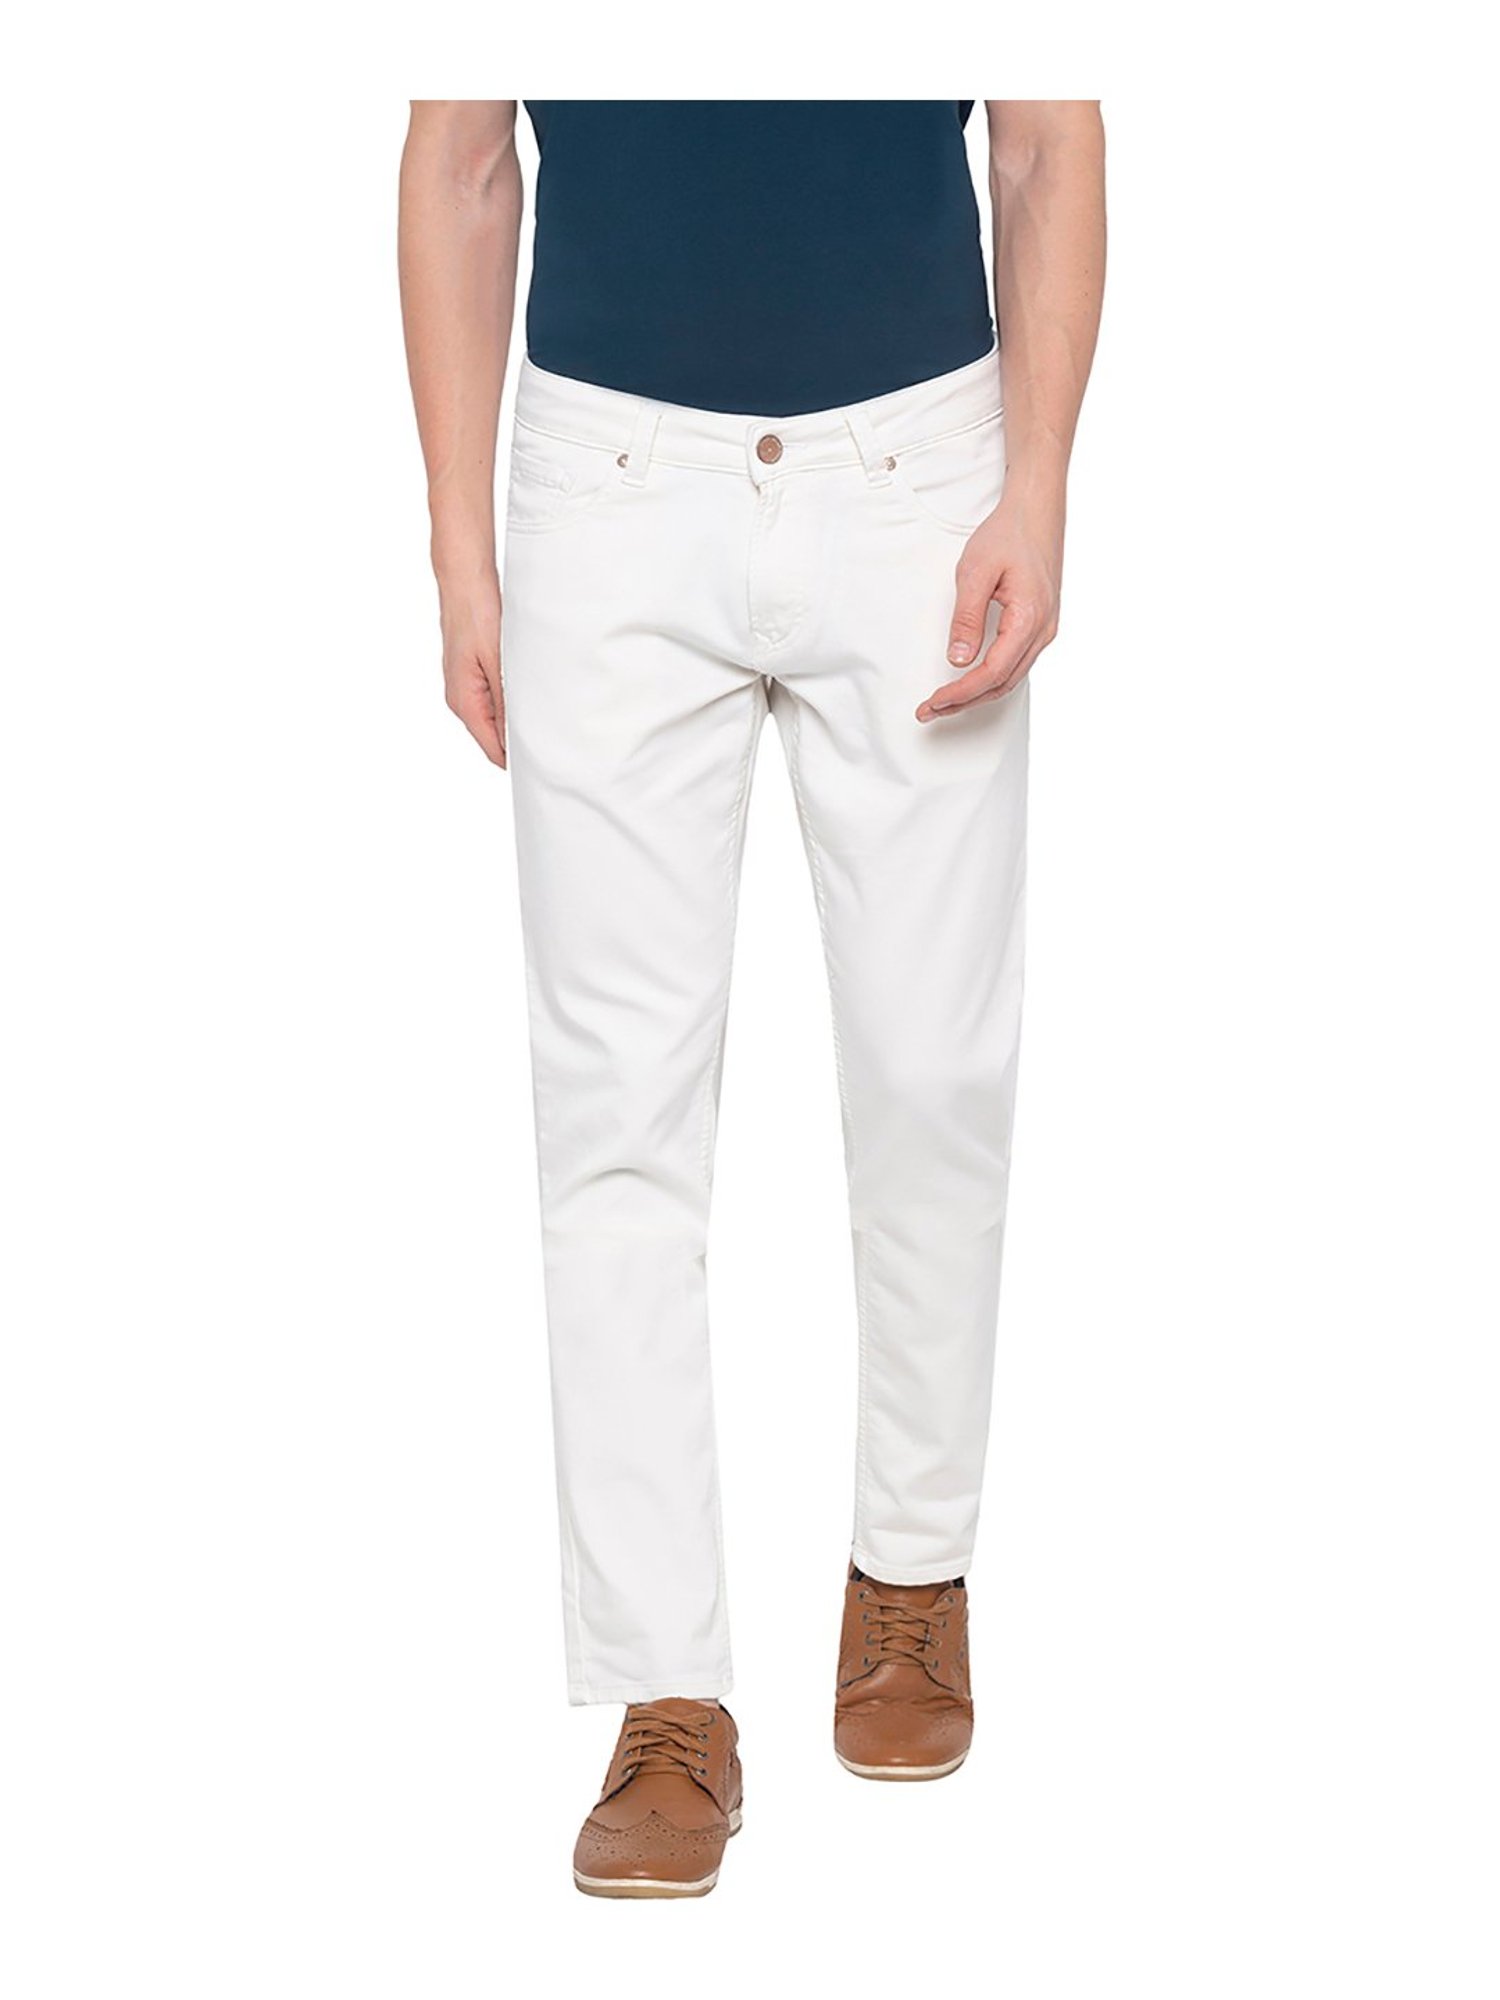 rugged white jeans